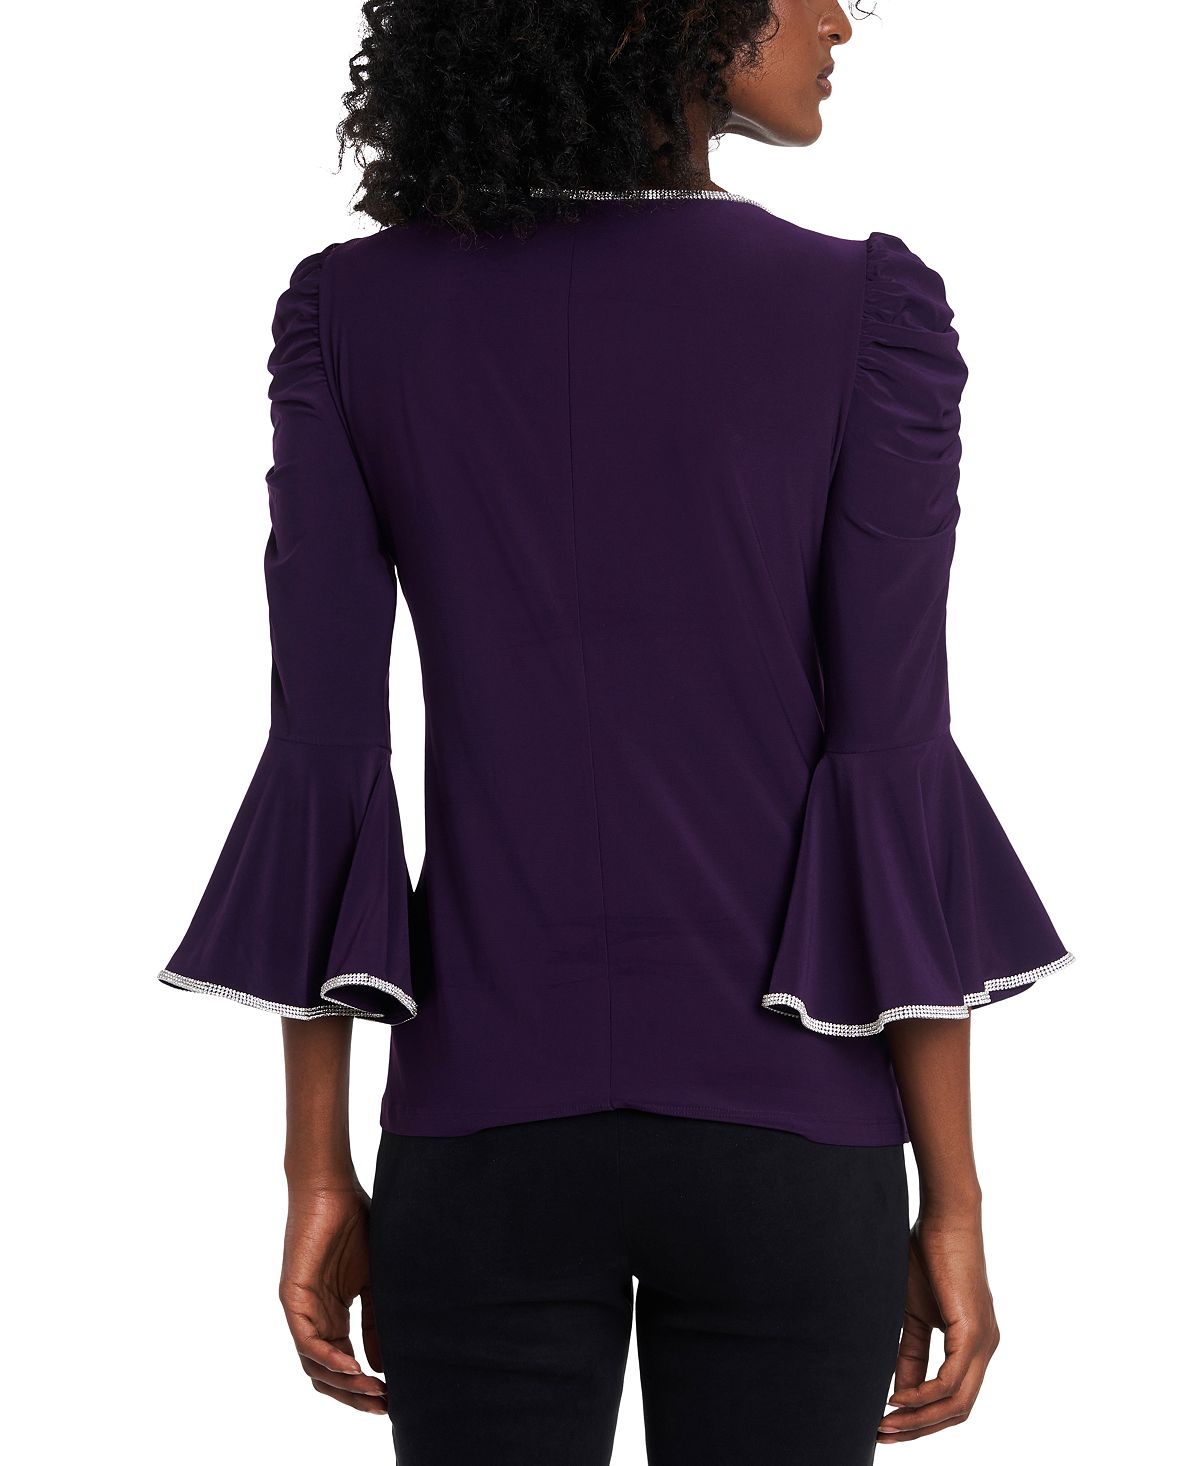 Msk Embellished Boat-neck Top Luxe Plum